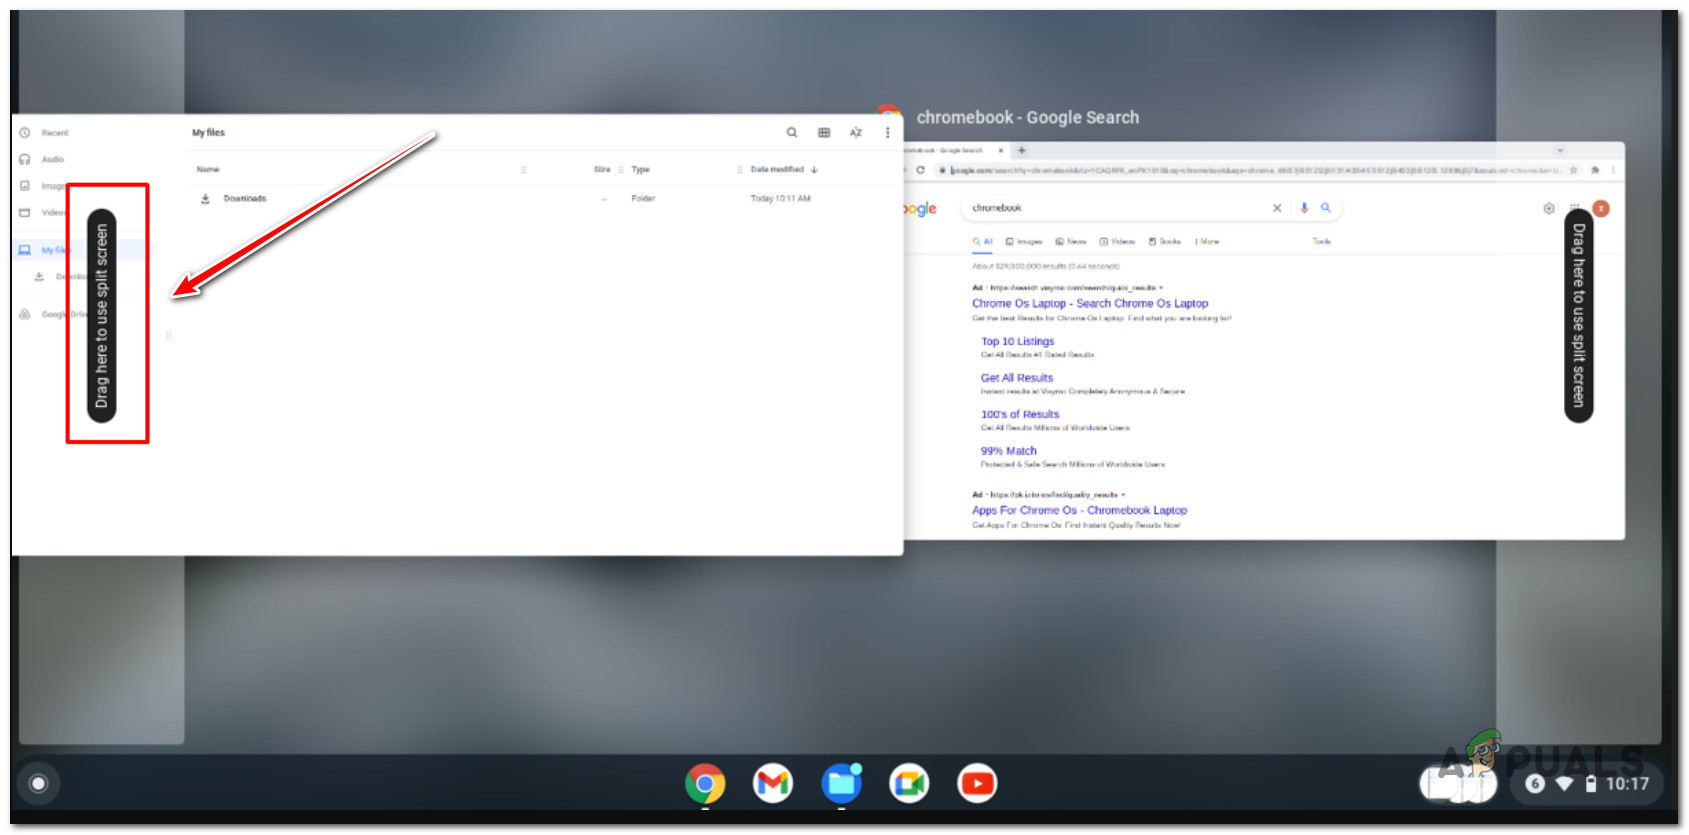 Using the split screen feature via the 'Show Windows' button on Chromebook